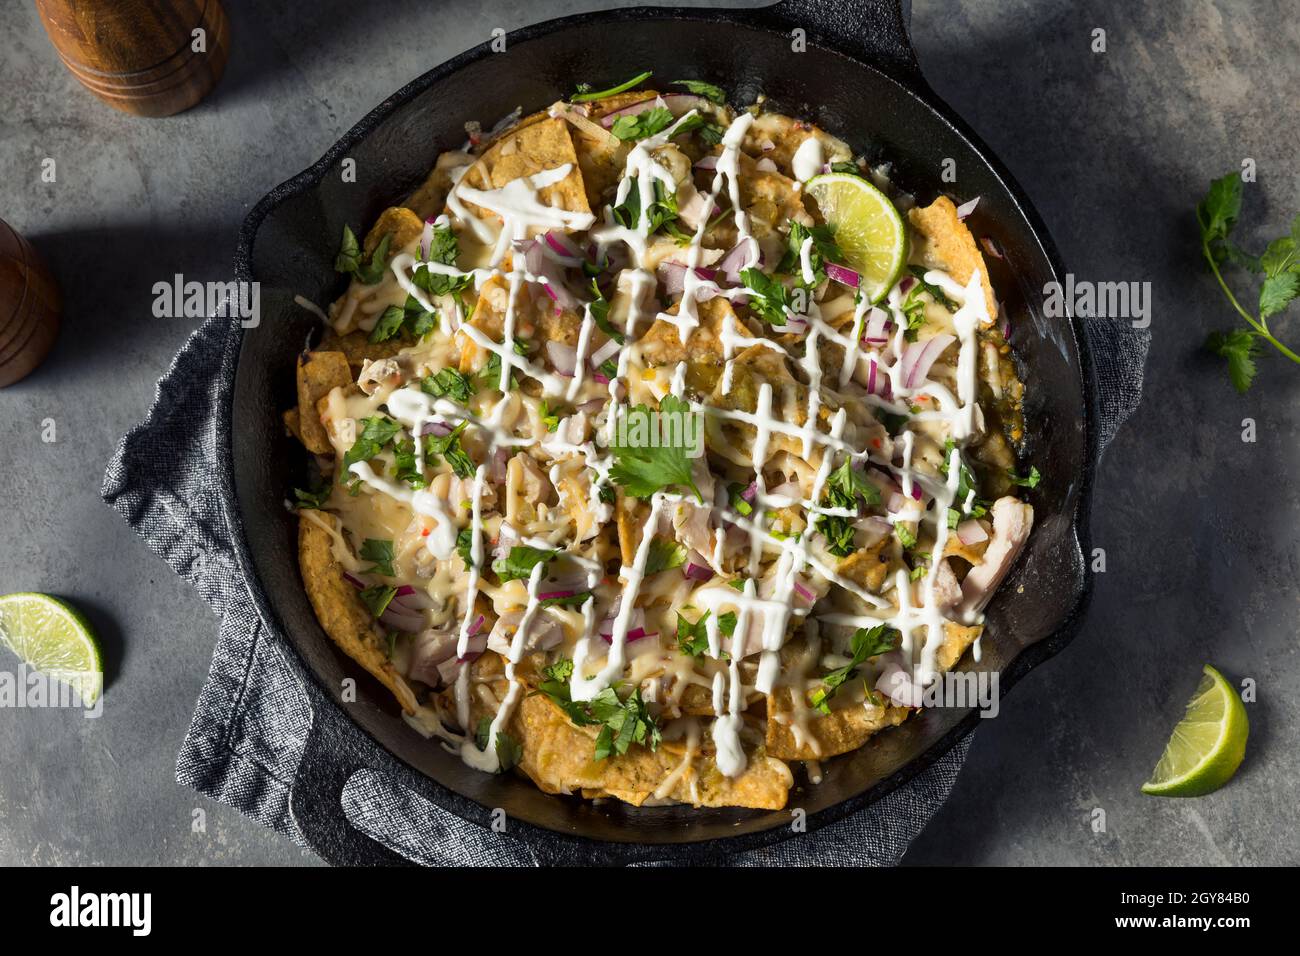 Homemade Mexican Green Chilaquiles with Tomatillo and Chicken Stock Photo